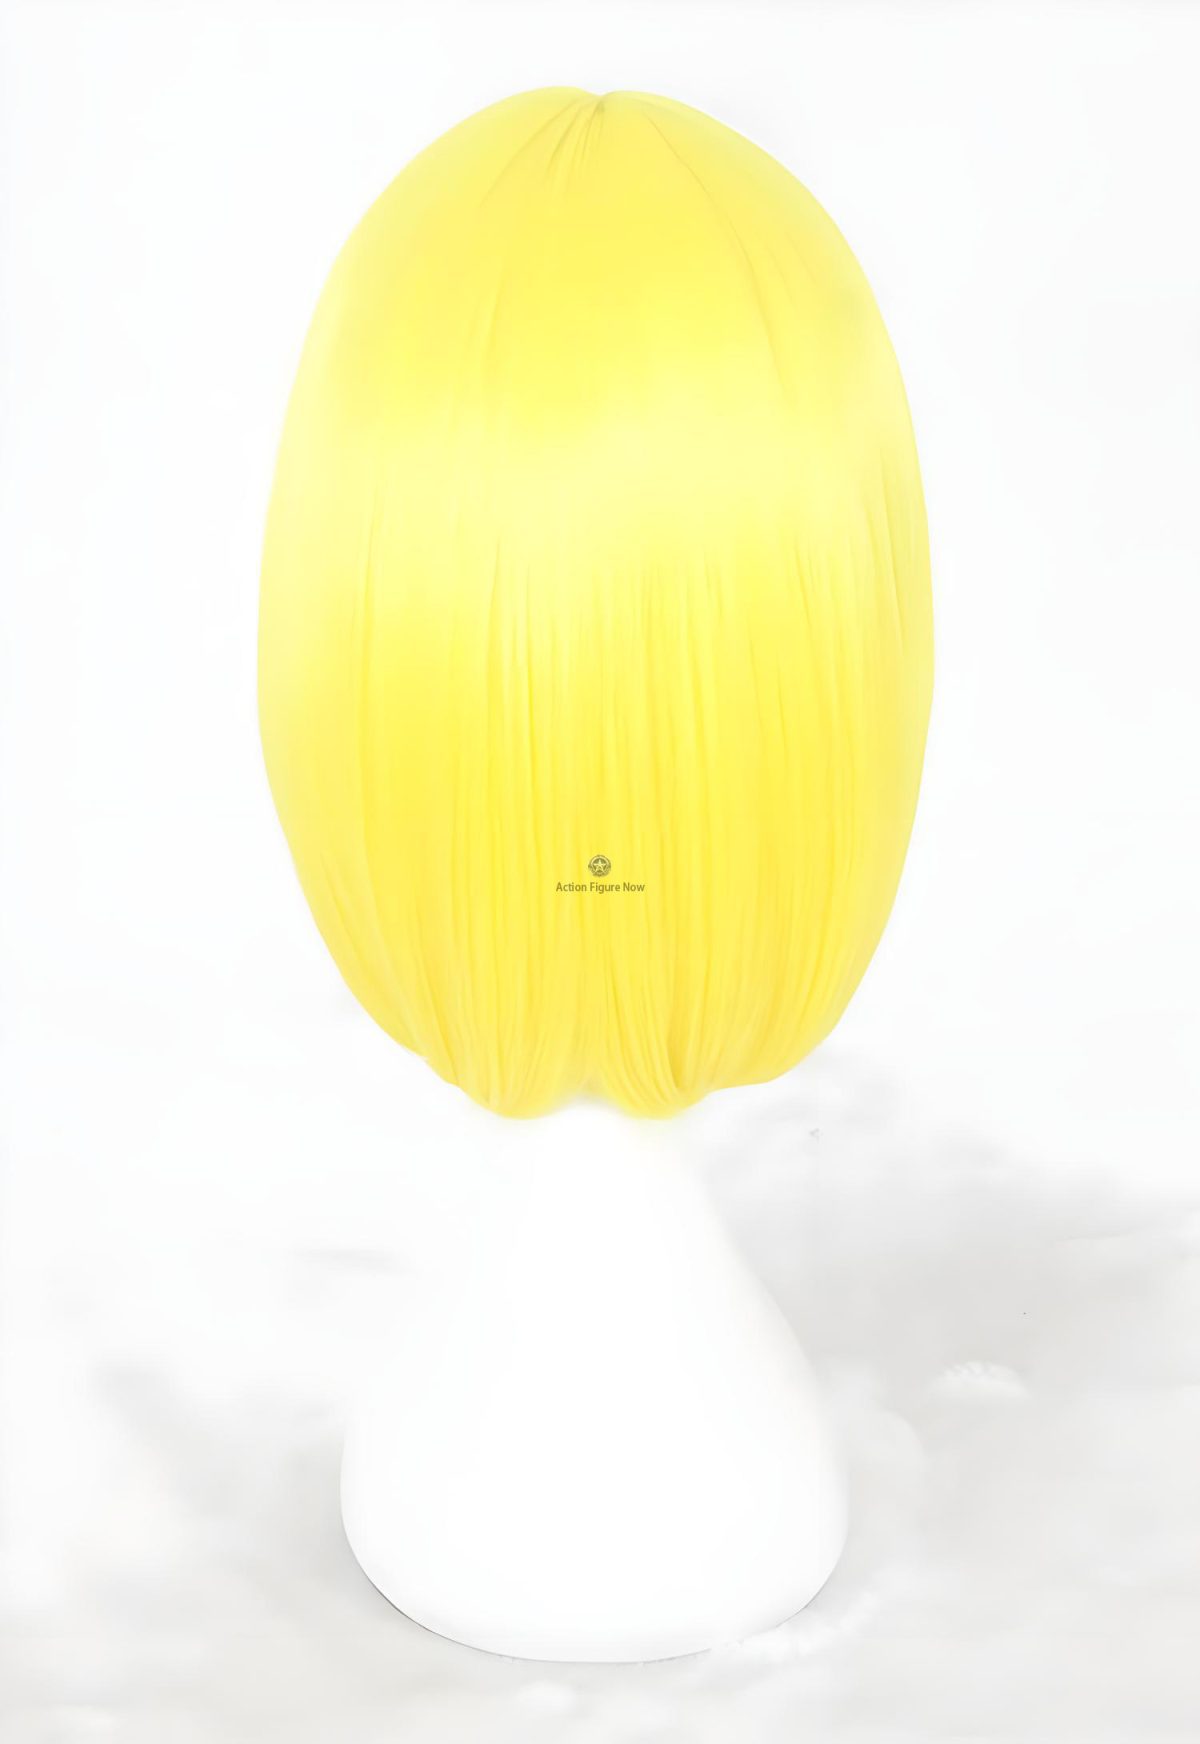 Cosplay Wig - Yellow Diamond from Land of the Lustrous